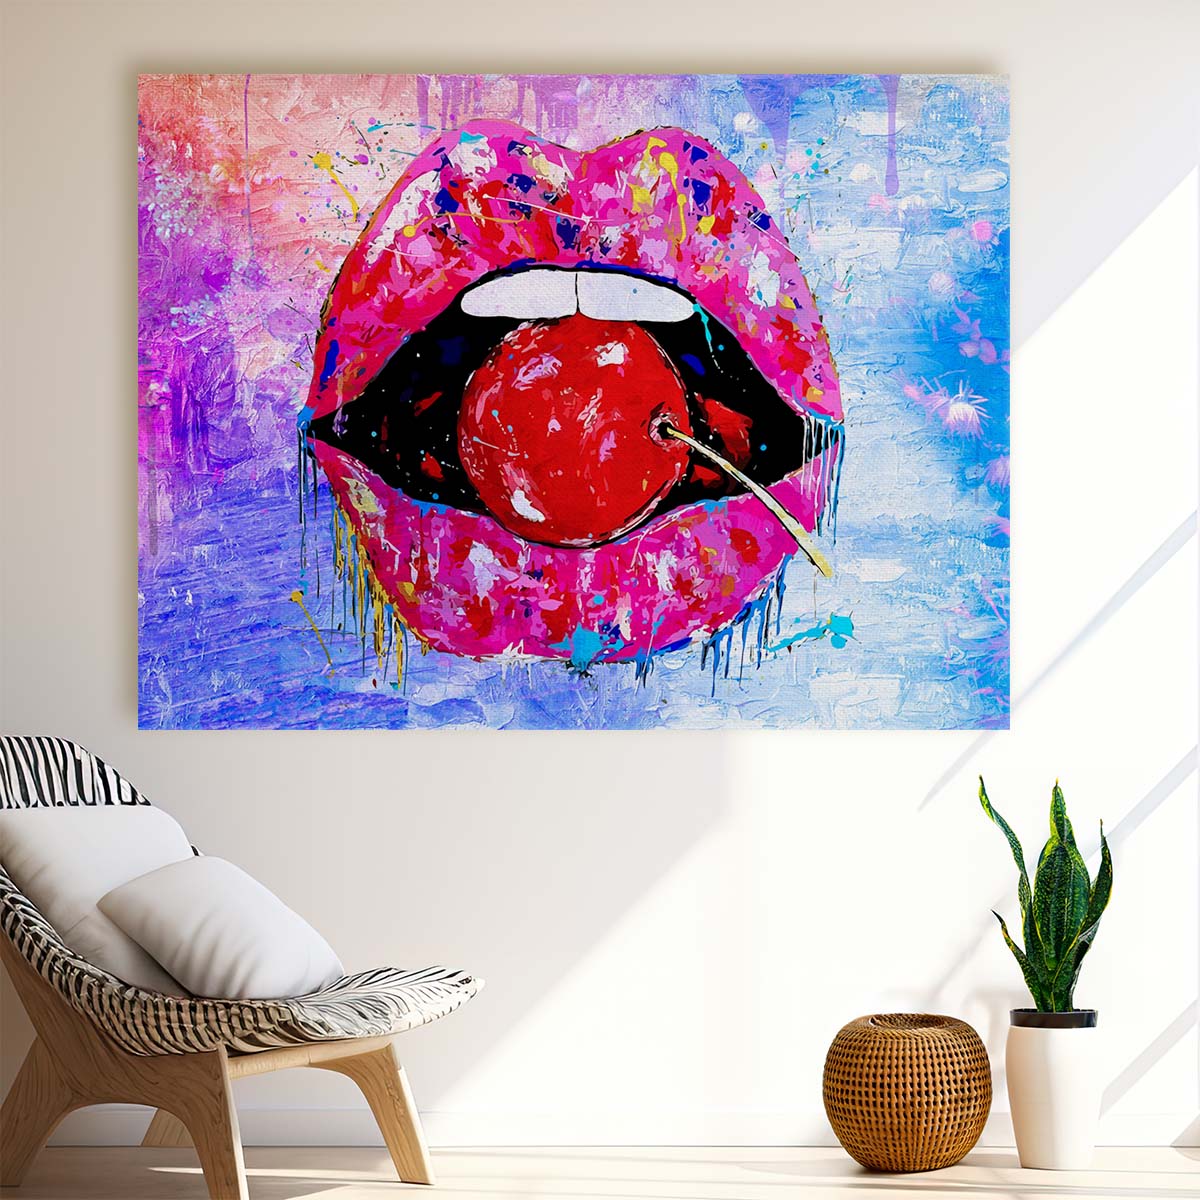 Cherry On My Lips Graffiti Wall Art by Luxuriance Designs. Made in USA.